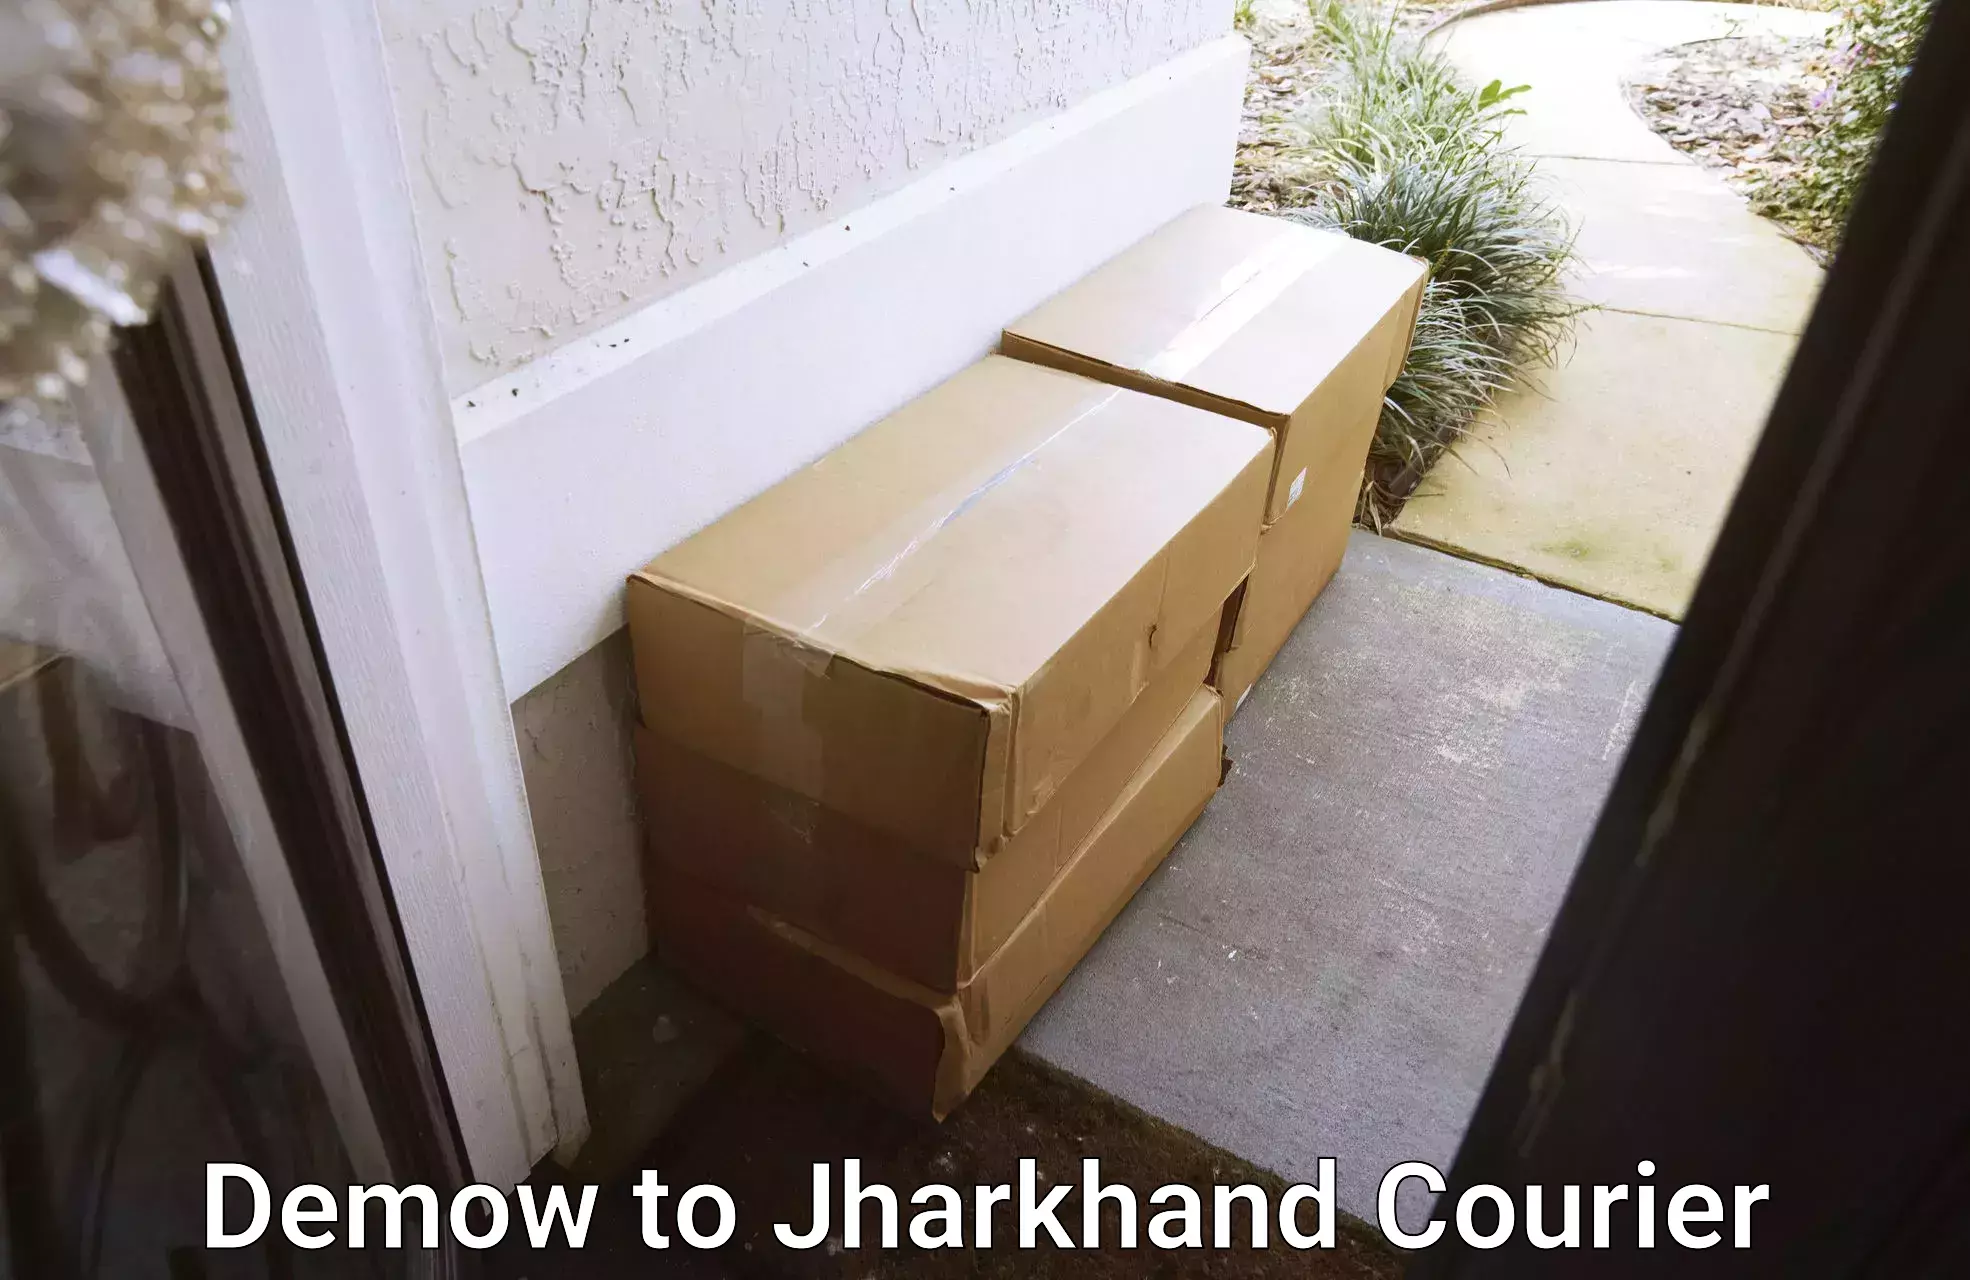 Nationwide parcel services Demow to Jharkhand